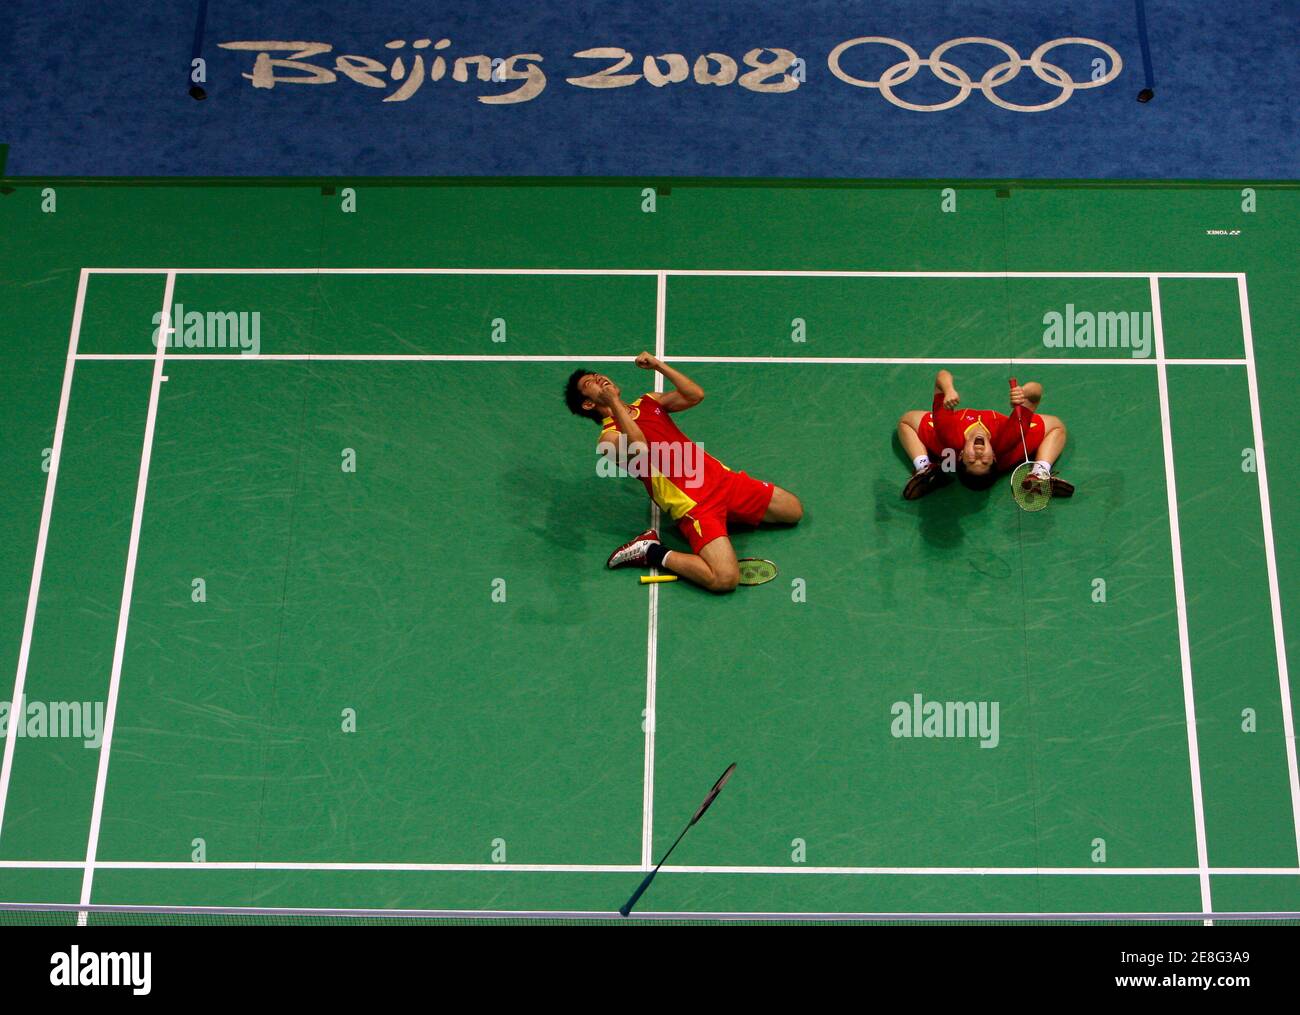 He Hanbin (L) and Yu Yang of China celebrate winning their mixed doubles bronze medal badminton match against Indonesia at the Beijing 2008 Olympic Games August 17, 2008.     REUTERS/Beawiharta (CHINA) Stock Photo